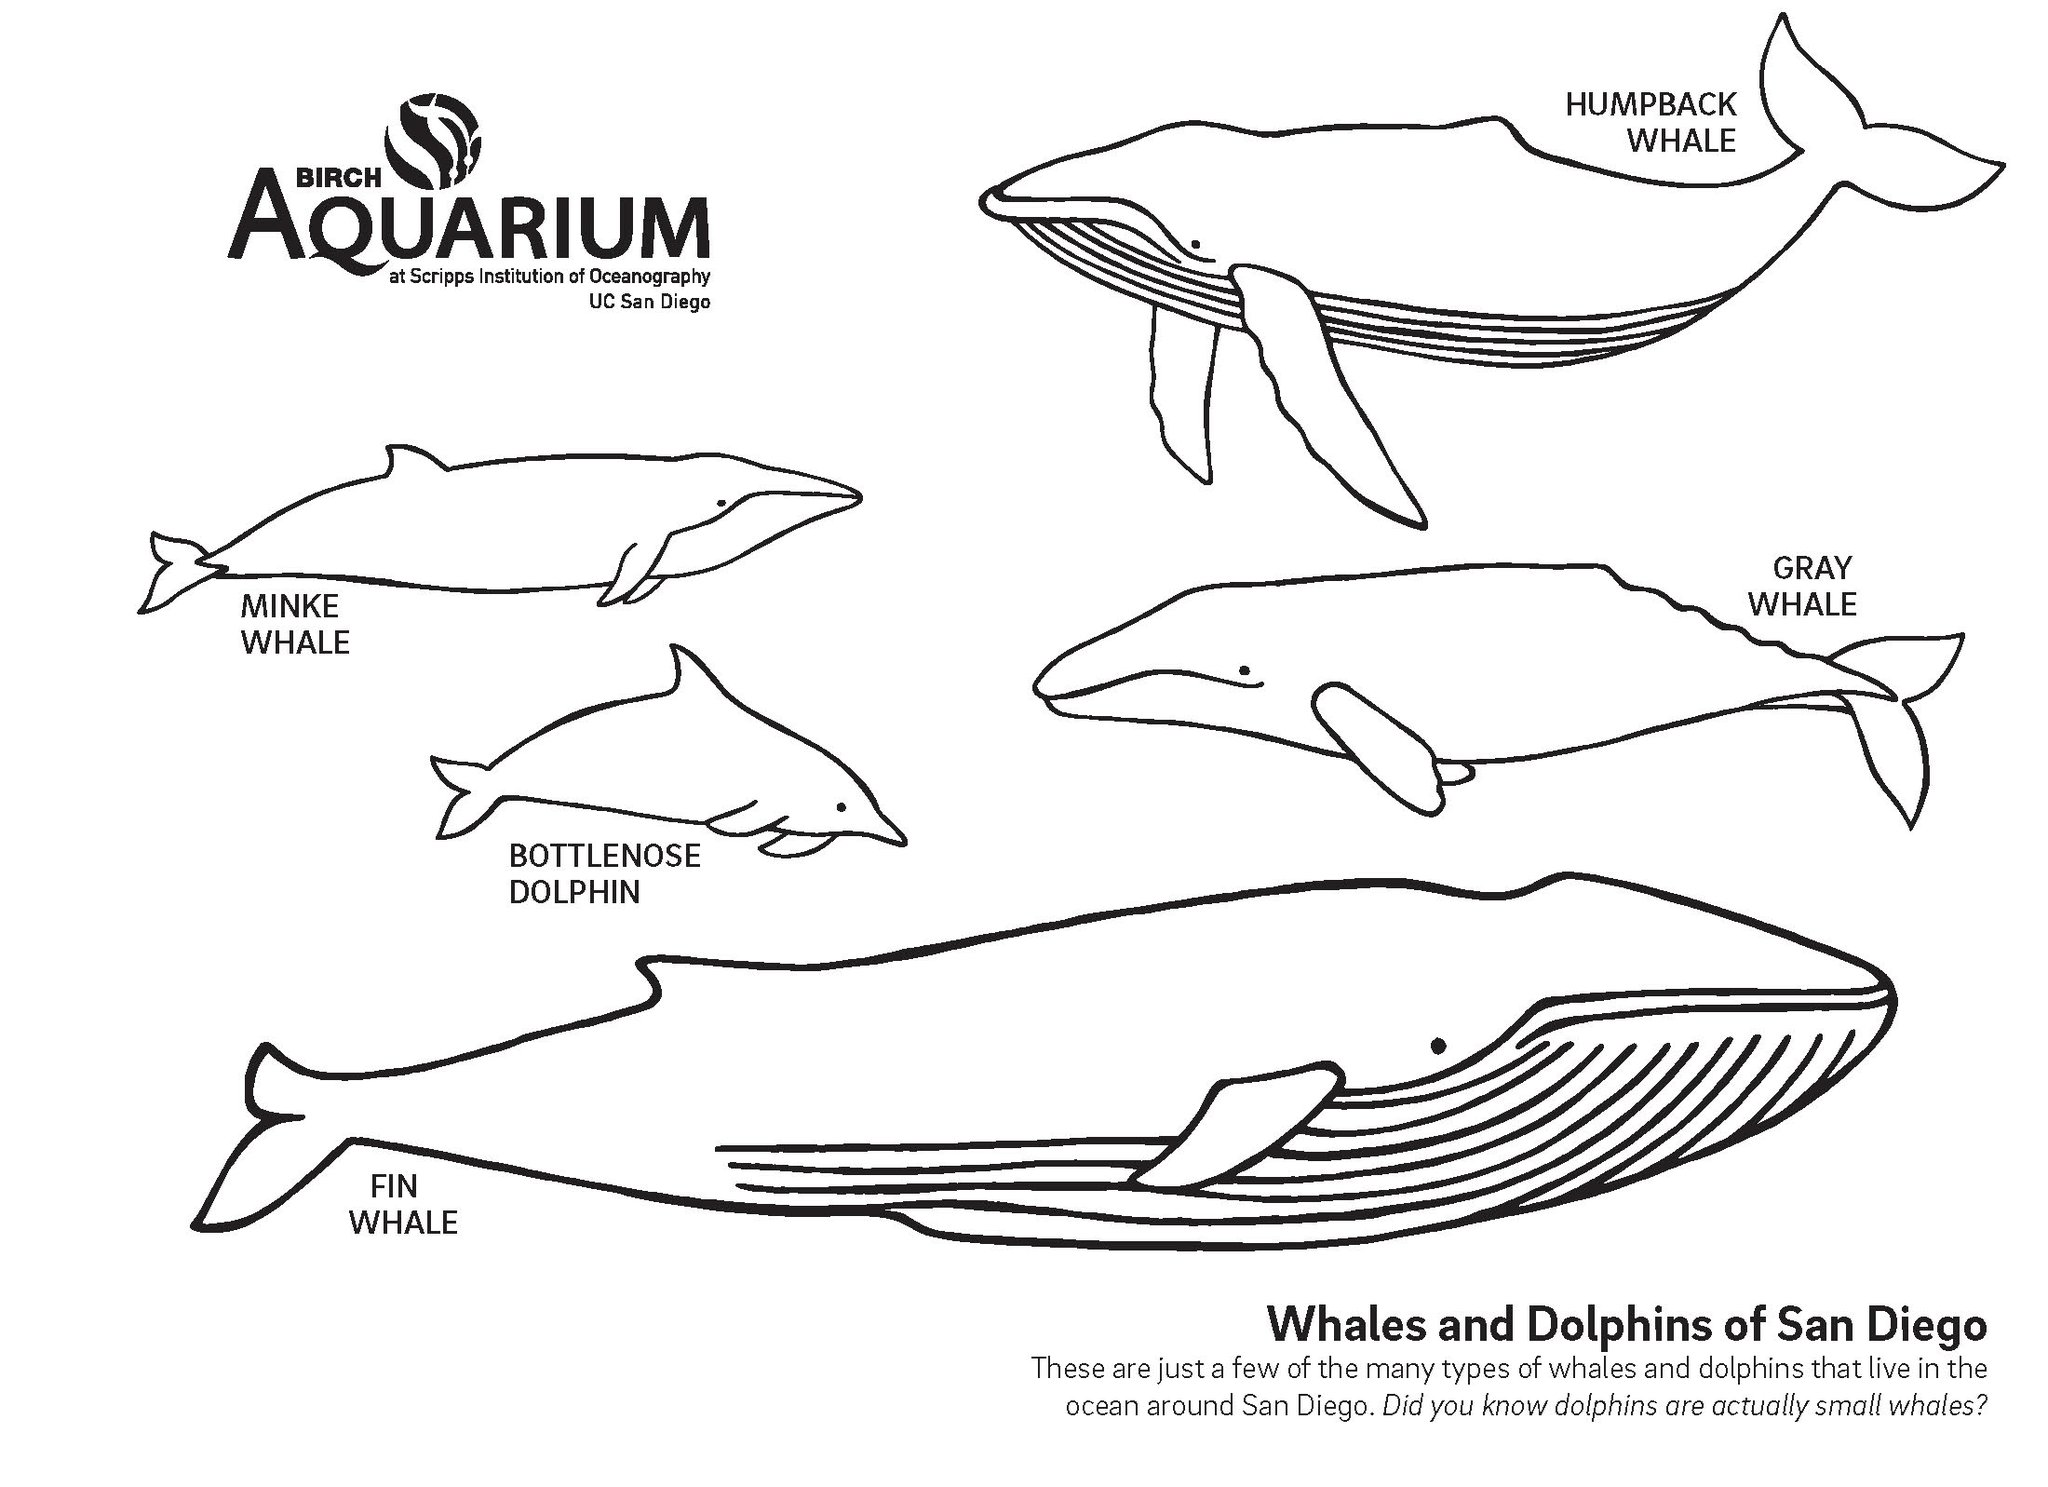 Scripps institution of oceanography on x still feeling inspired by whales get creative with one of birchaquariums new coloring sheets including this whales of sandiego sheet download here httpstcoqvayhc ð we want